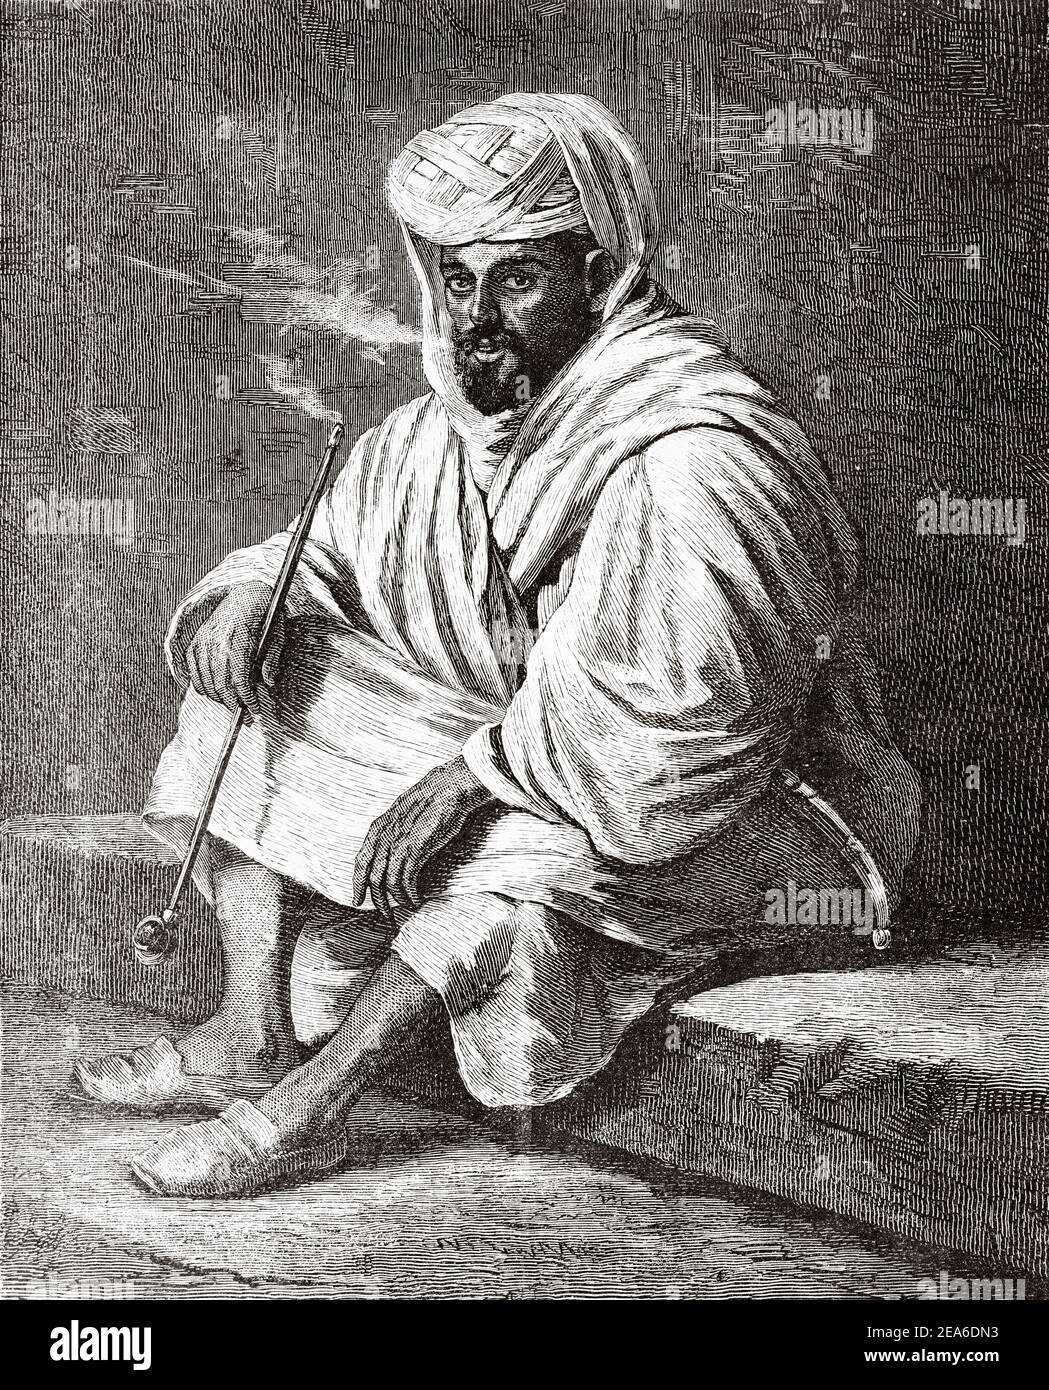 Tunisian pilgrim smoking a pipe and dressed in traditional Arab clothing, Tunisia, North Africa. Old 19th century engraved illustration from El Mundo Ilustrado 1879 Stock Photo